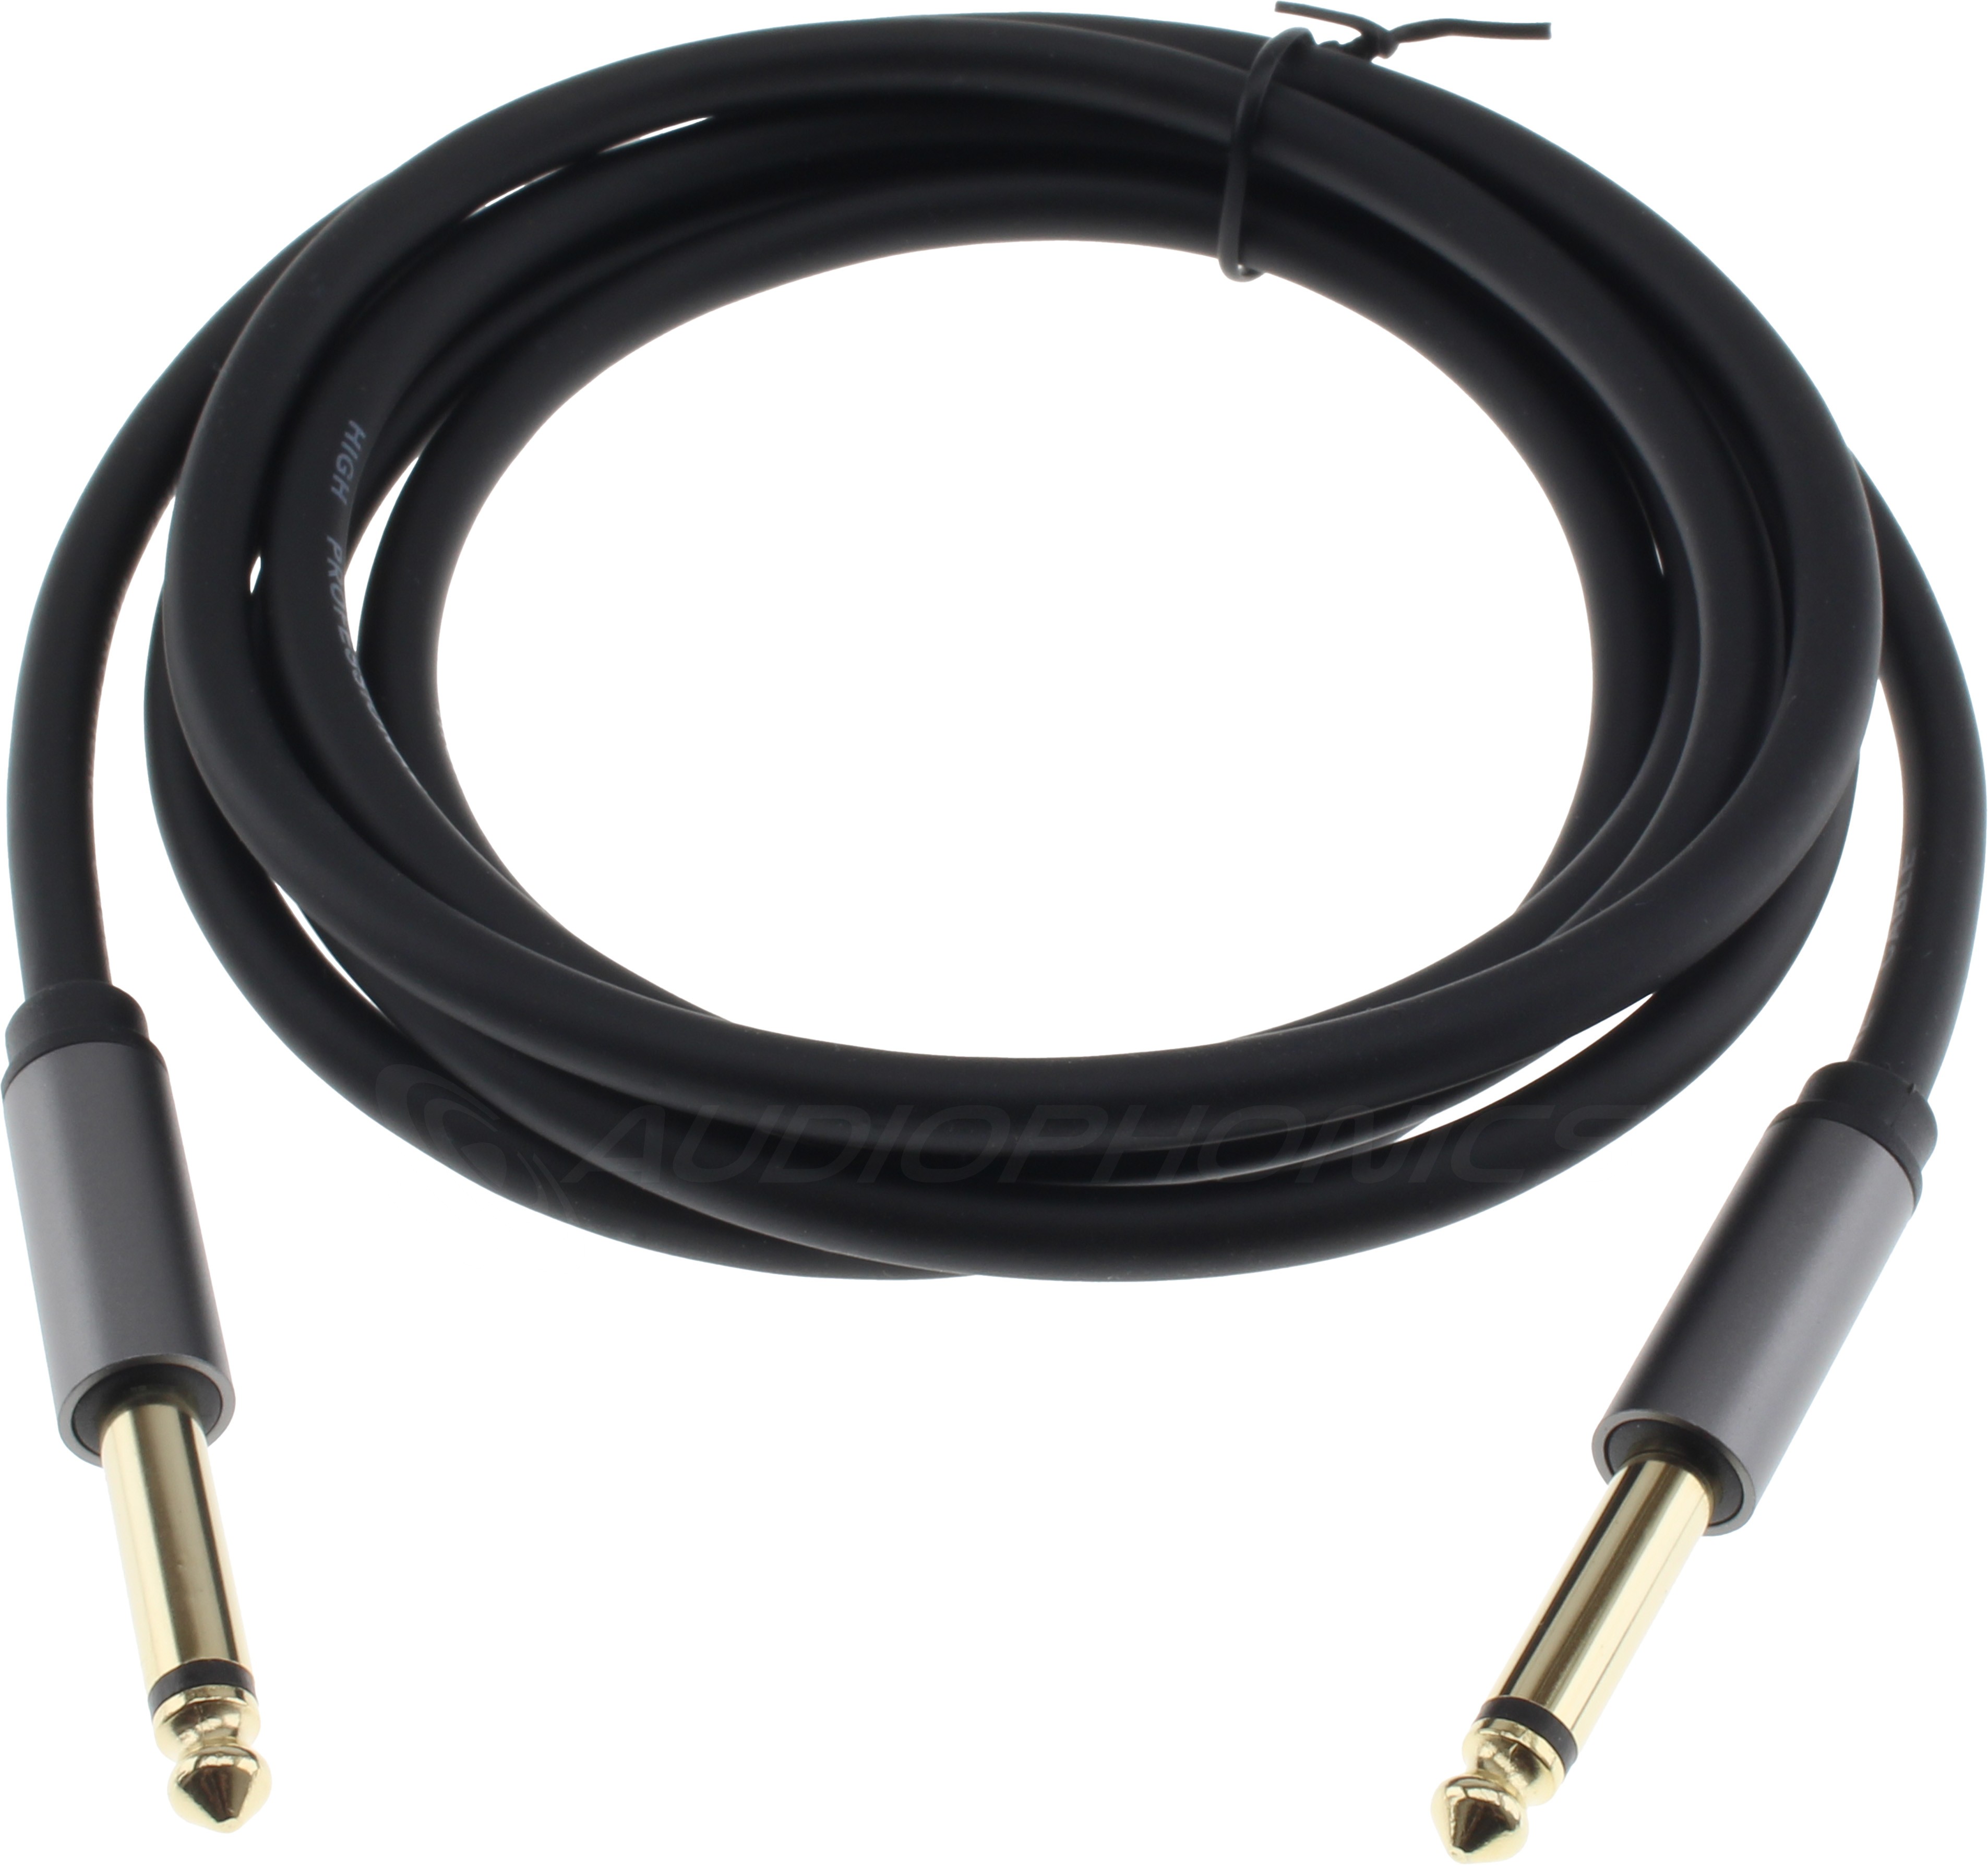 Male Jack 6.35mm to Male Jack 6.35mm Mono Cable Shielded Gold Plated 1m